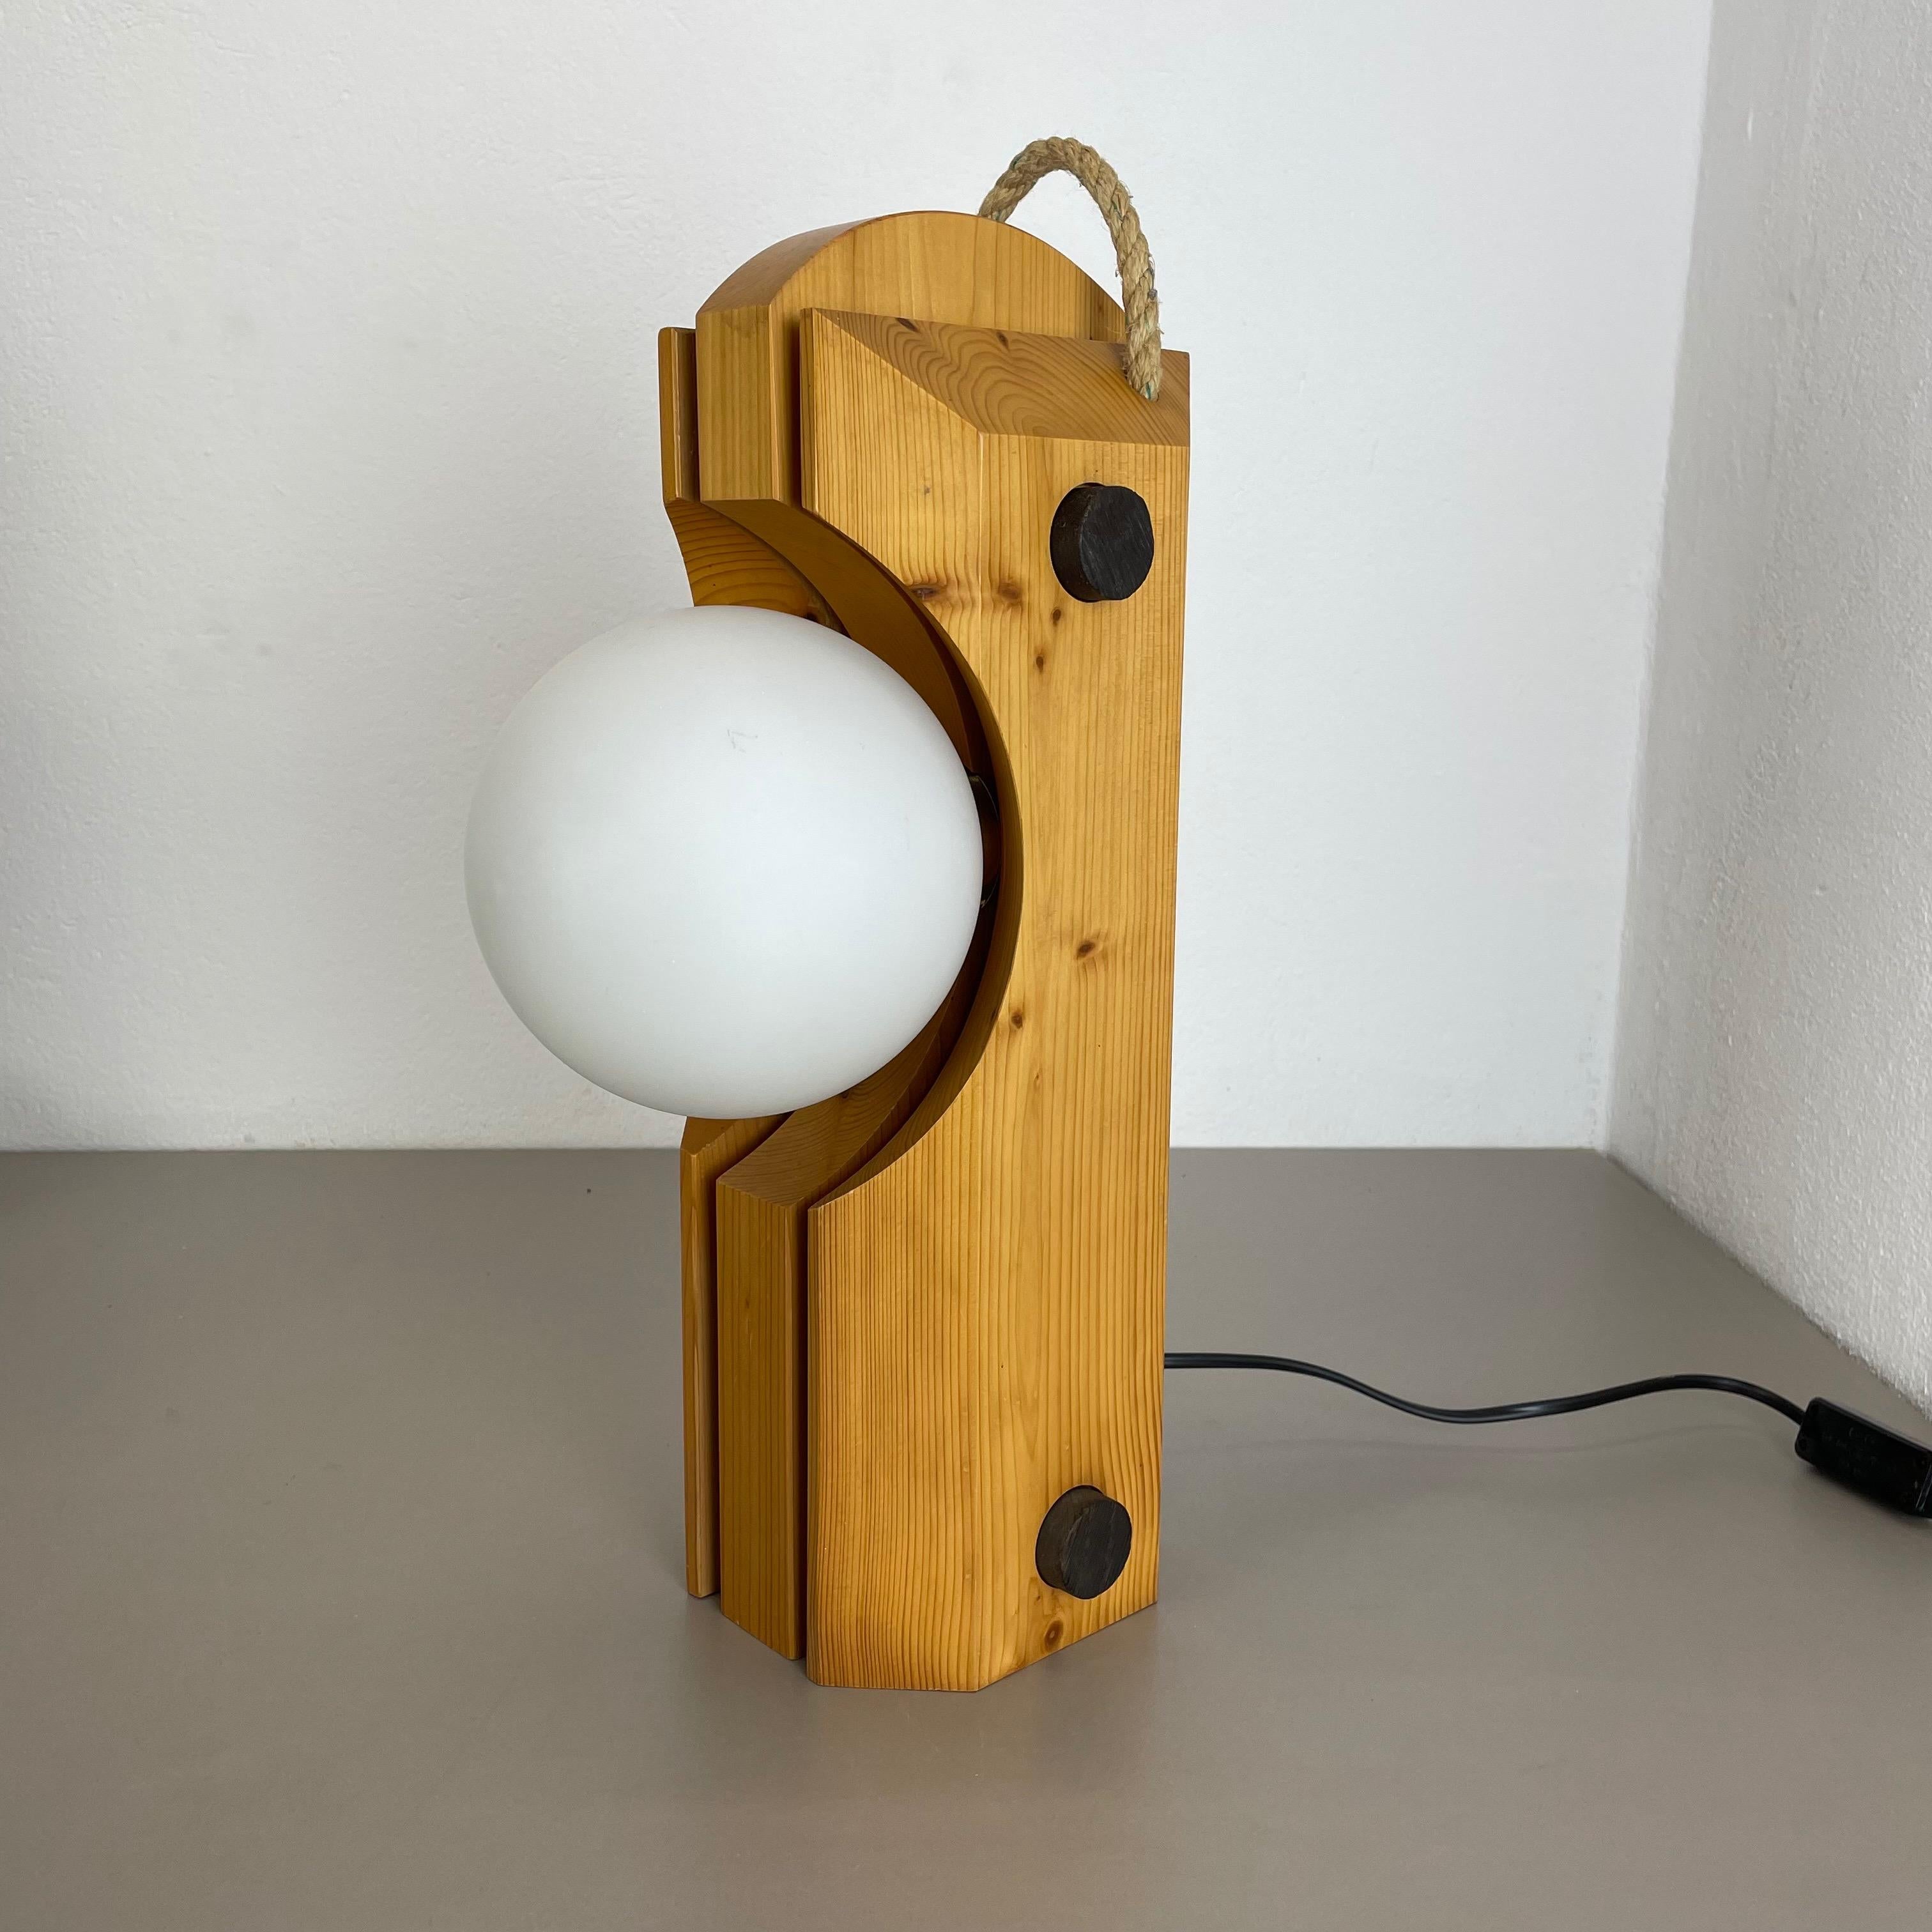 Article:

wooden organic table light


Producer:

TEMDE Lights, Germany



Origin:

Germany



Age:

1970s




Original vintage 1970s pine wooden table light made in Germany. High quality German production with a nice